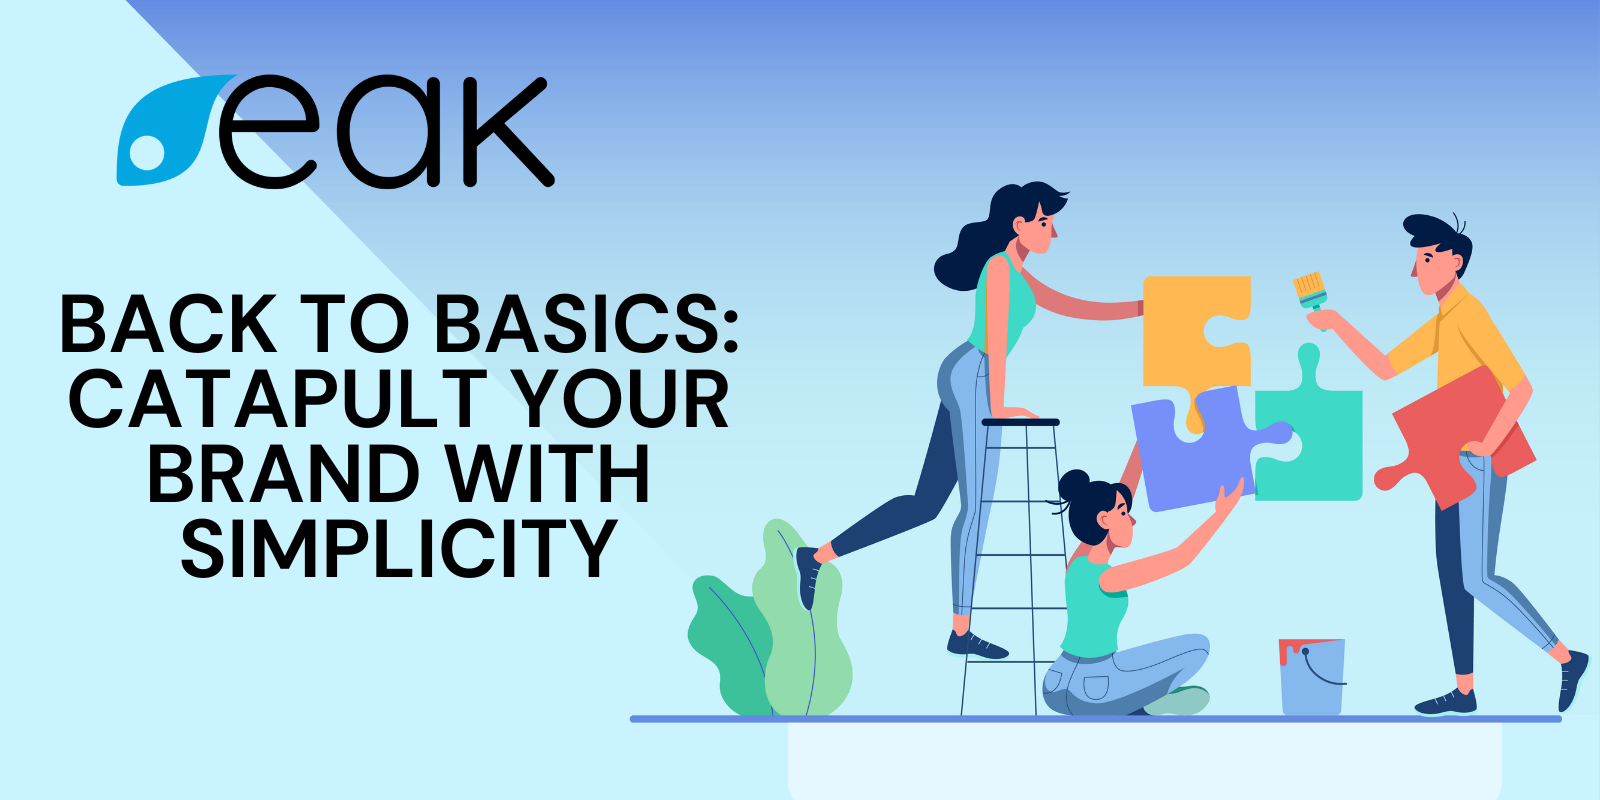 Back to basics: Catapult your brand with simplicity